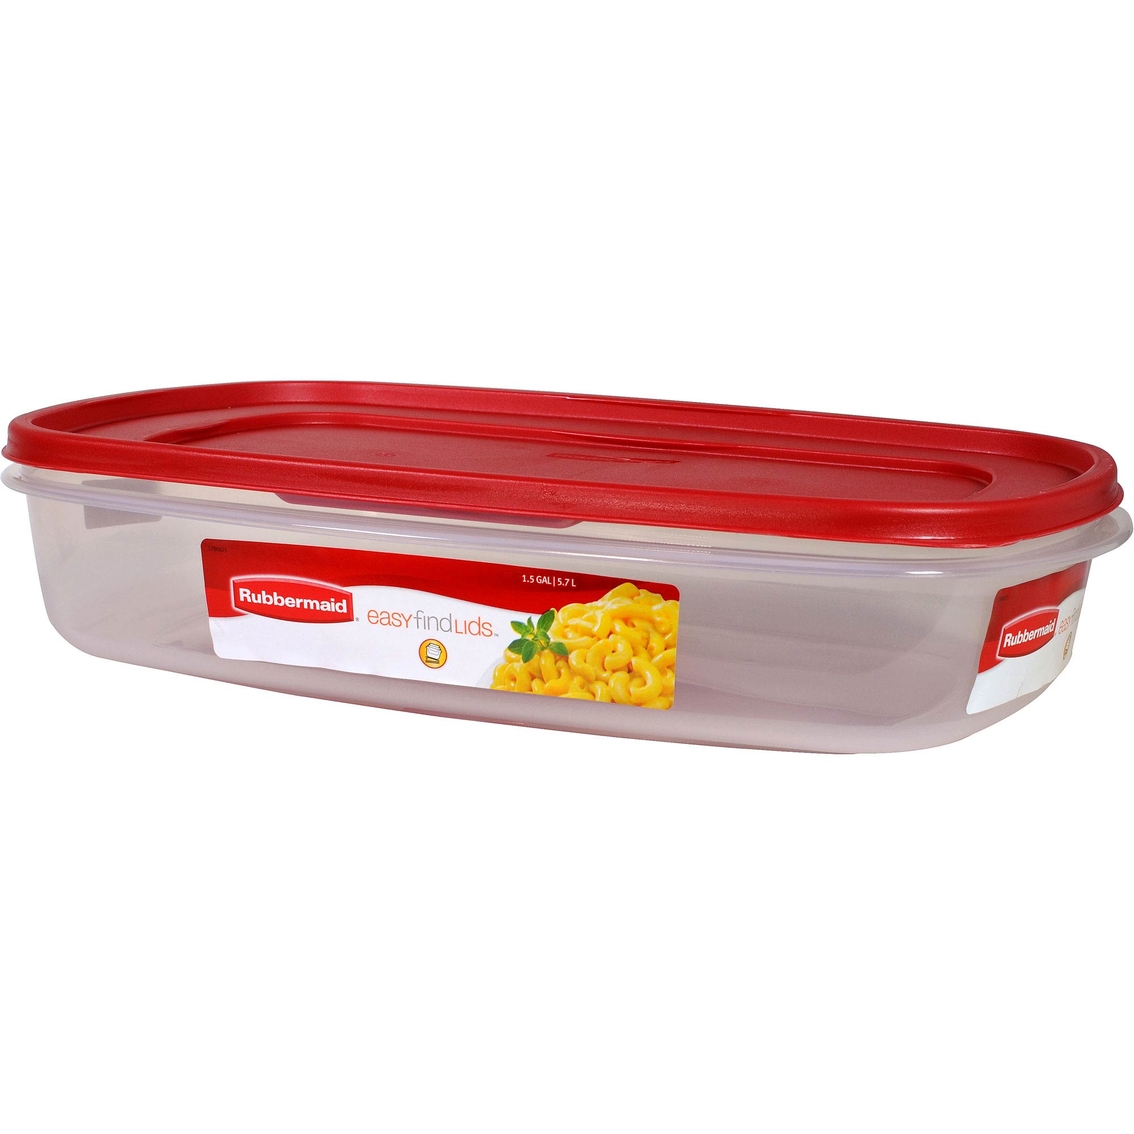 Rubbermaid Easy Find Lids Food Storage Container, Large with Red